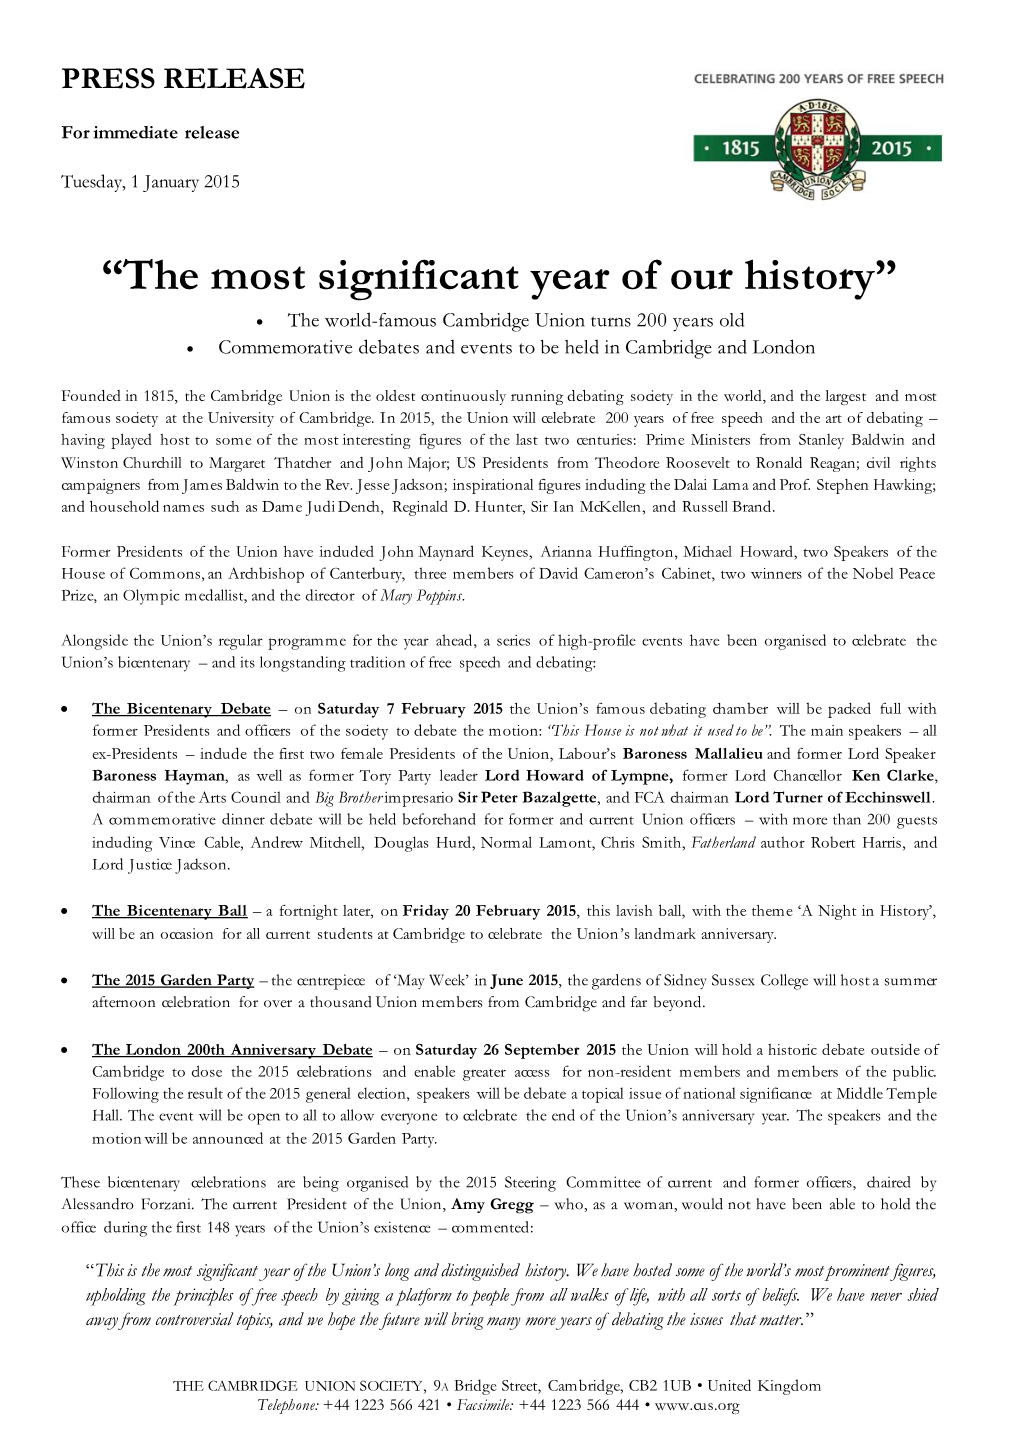 “The Most Significant Year of Our History”